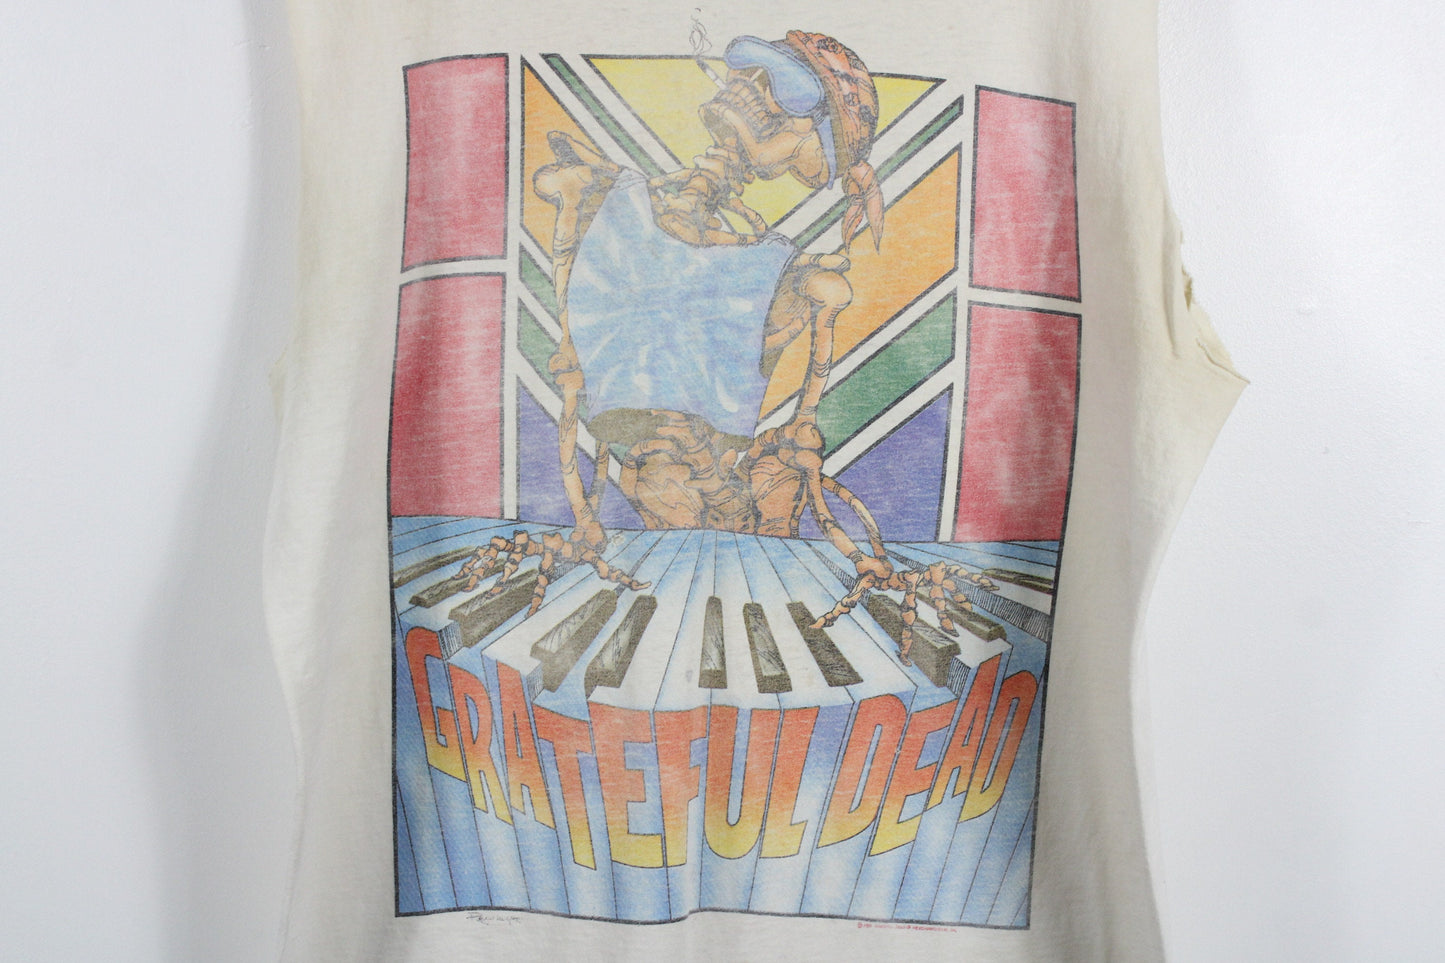 Grateful-Dead Band T-Shirt / Vintage Rock-and-Roll Music Album / 1989 Summer Tour Graphic Tee / 80s-90s-2000s Clothing